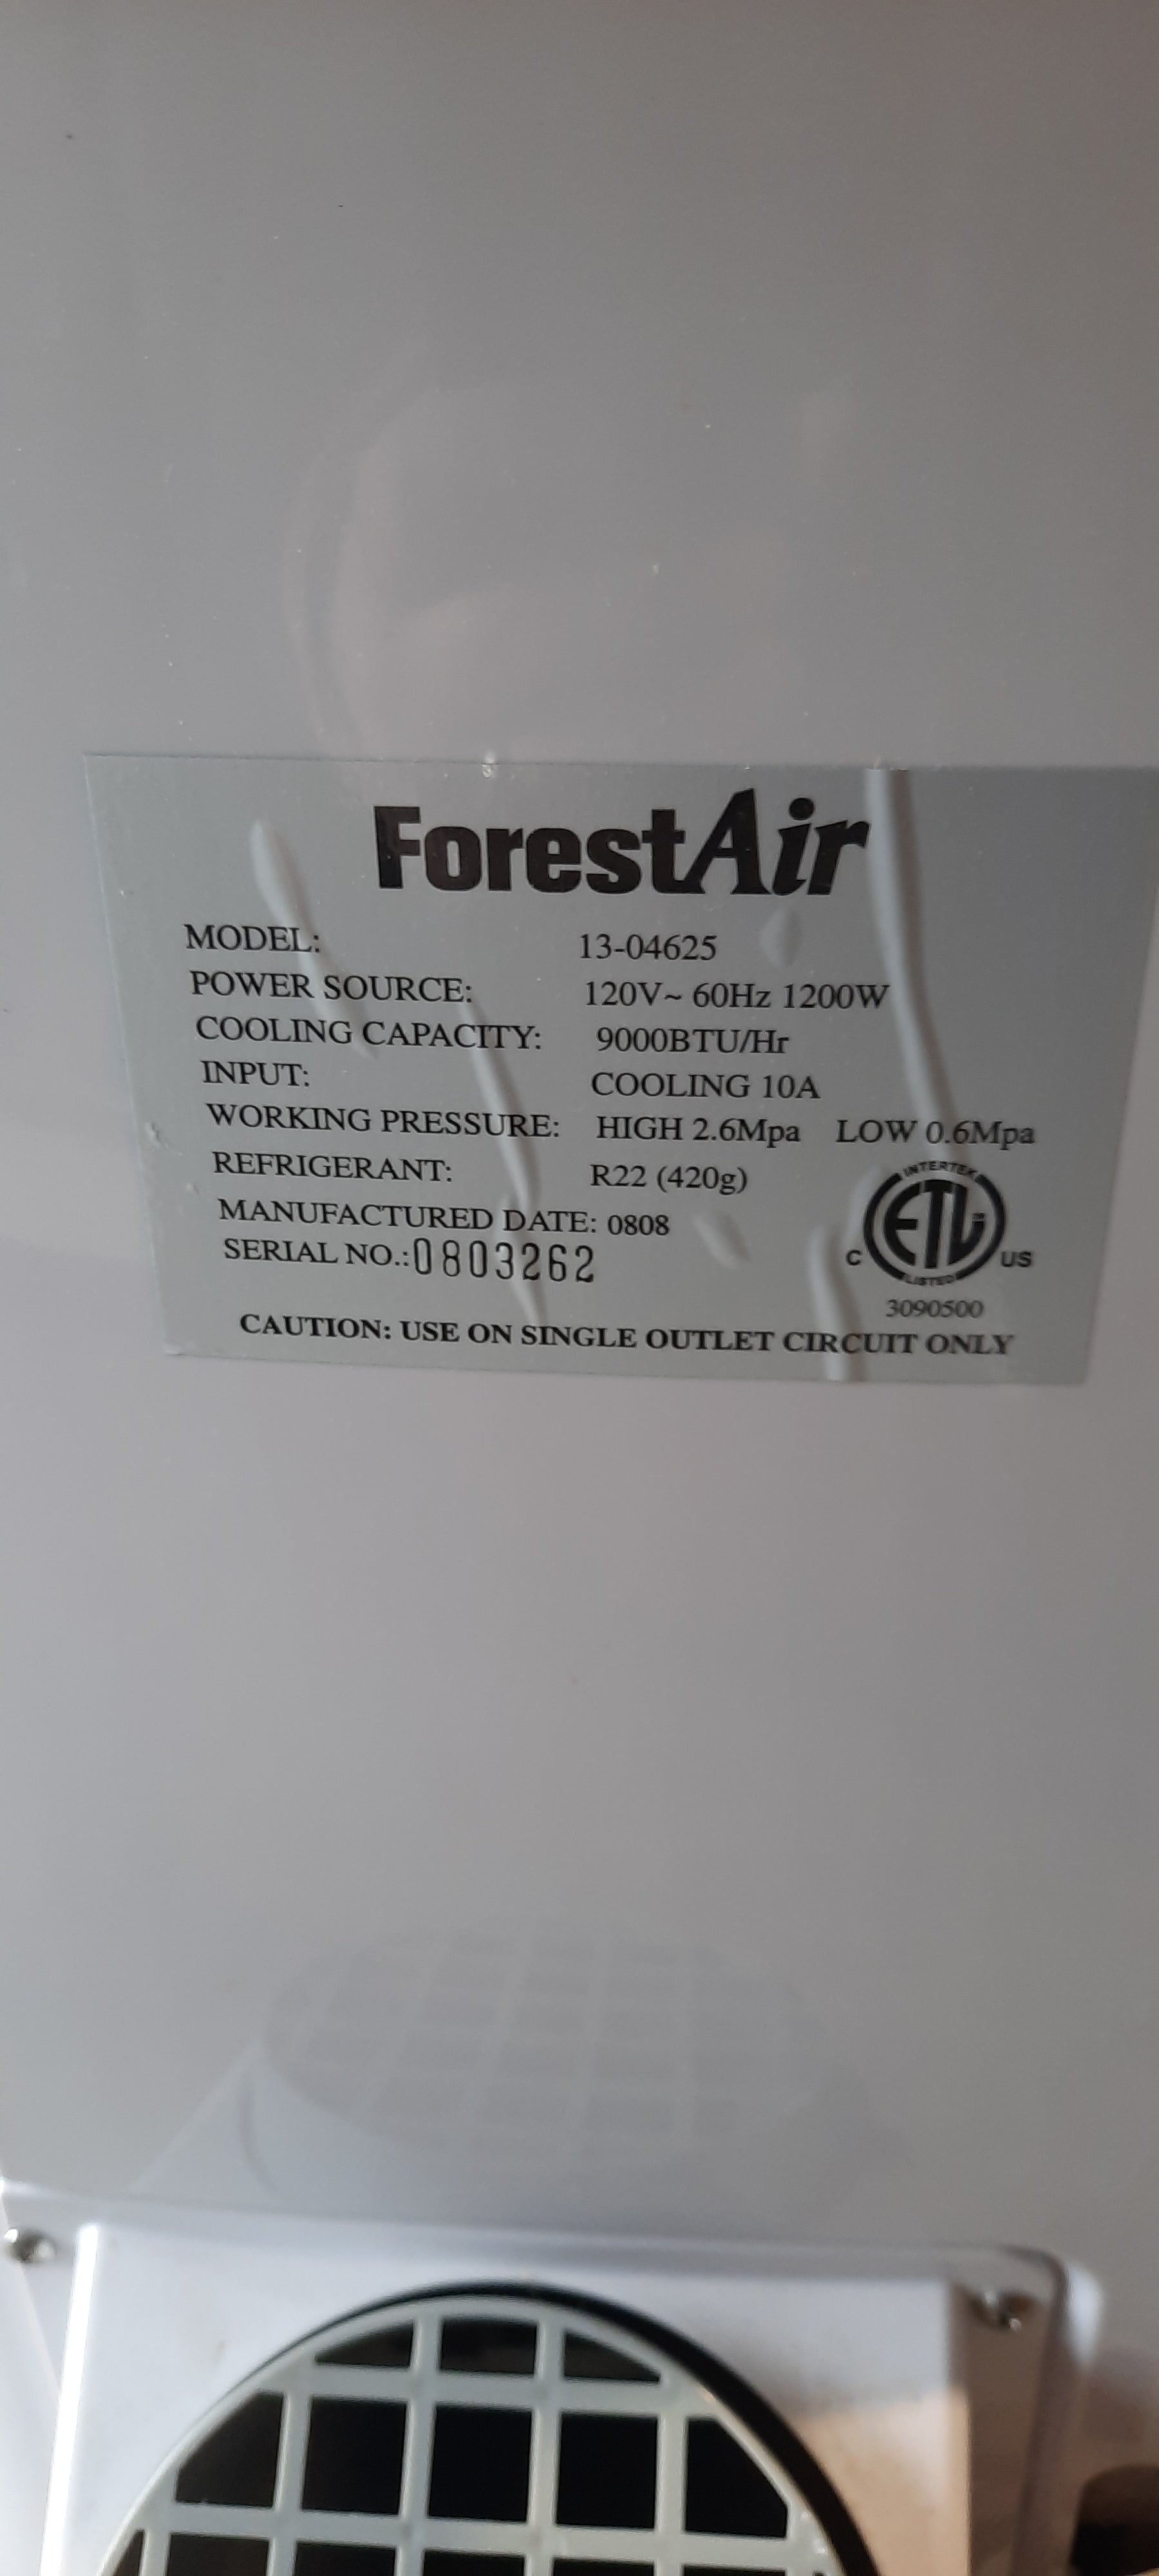 Air Conditioner & Humidifier